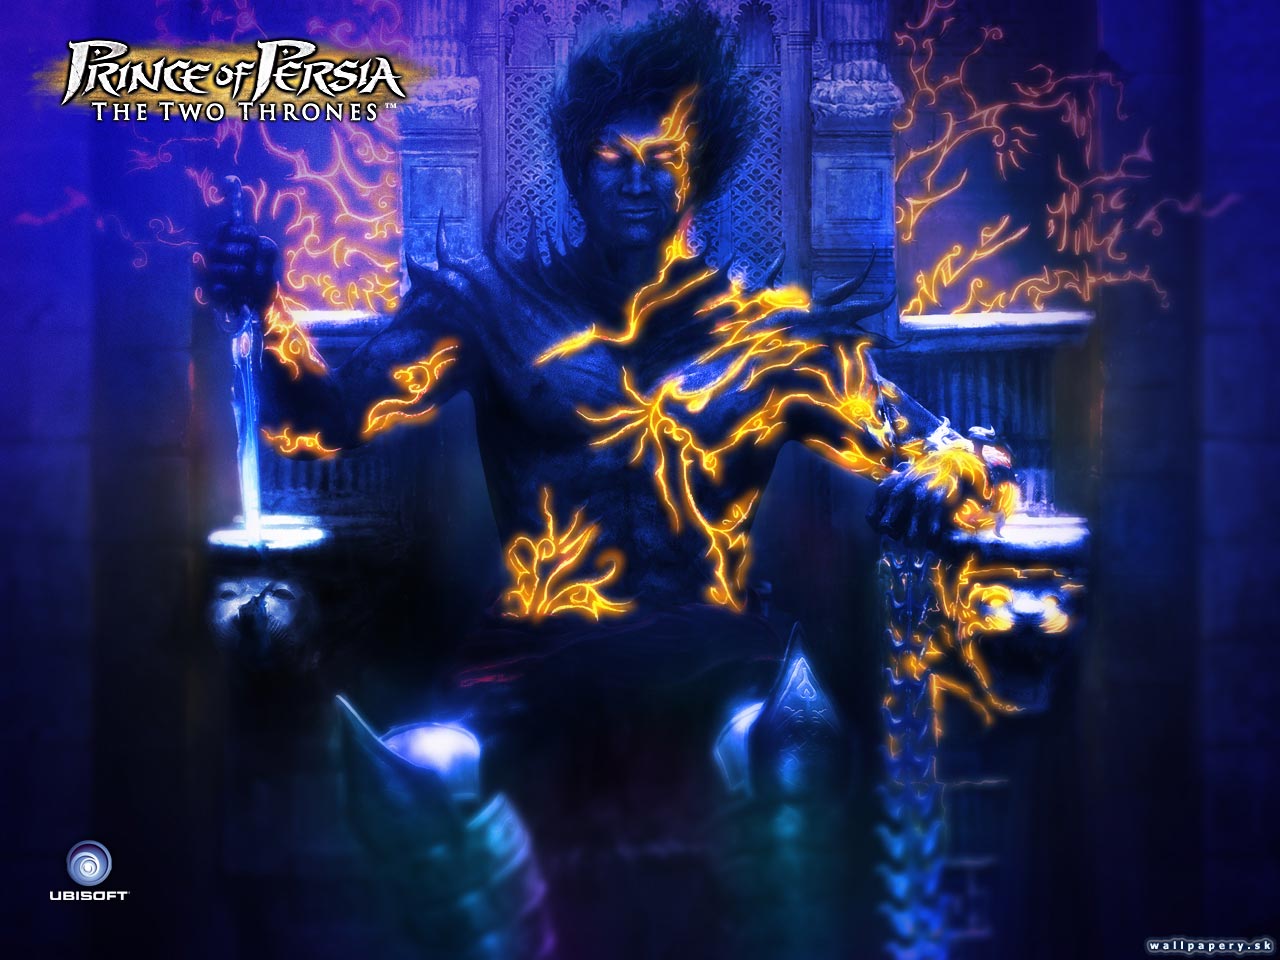 Prince of Persia: The Two Thrones - wallpaper 4